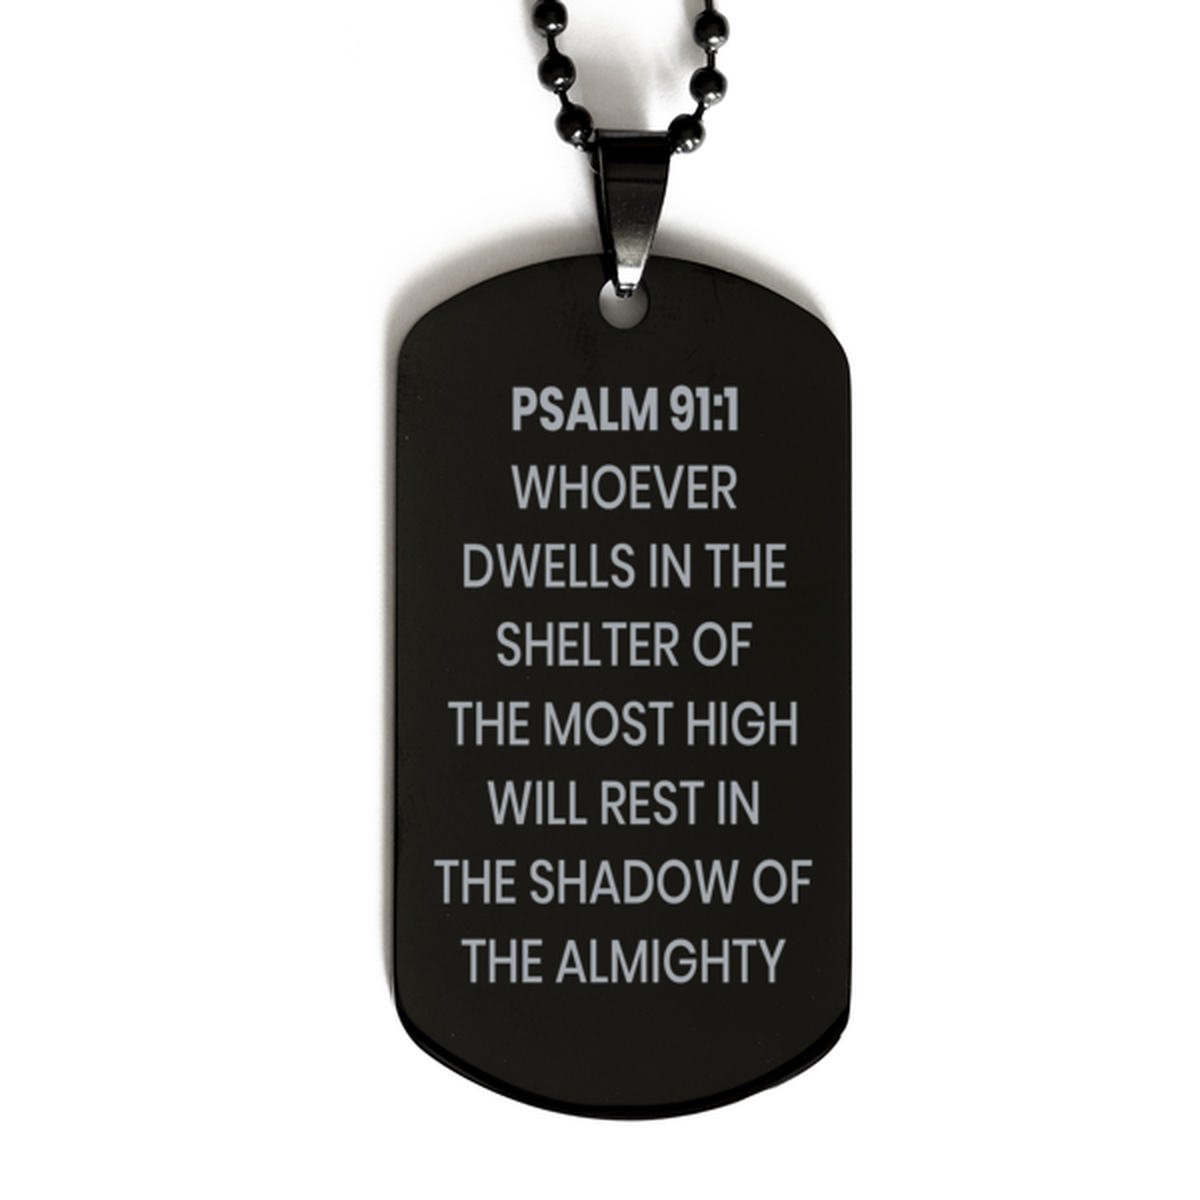 Psalm 91:1 Necklace, Bible Verse Necklace, Christian Necklace, Christian Birthday Gift, Black Dog Tag Necklace, Gift for Christian.